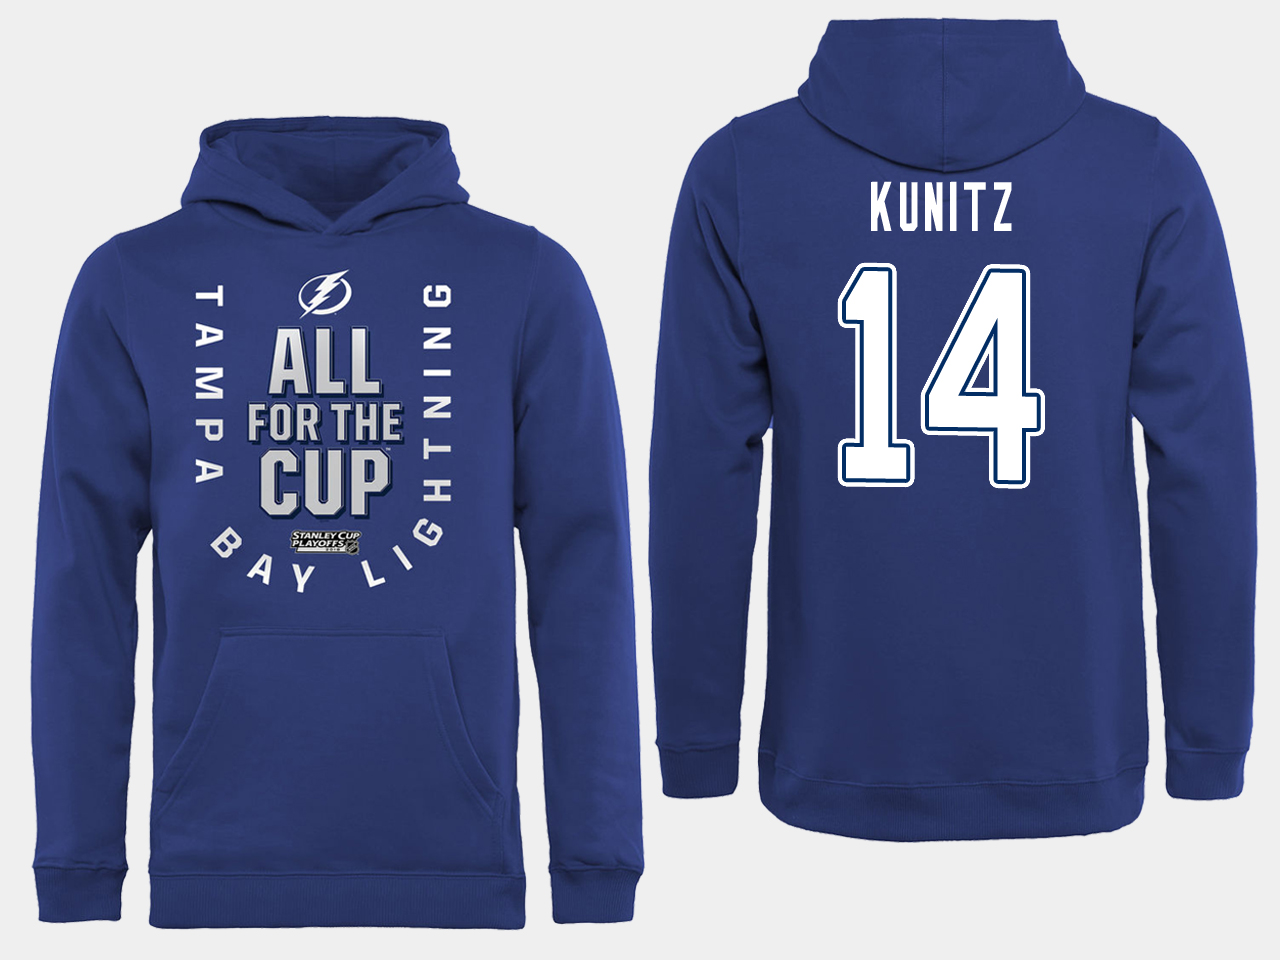 NHL Men adidas Tampa Bay Lightning 14 Kunitz blue All for the Cup Hoodie